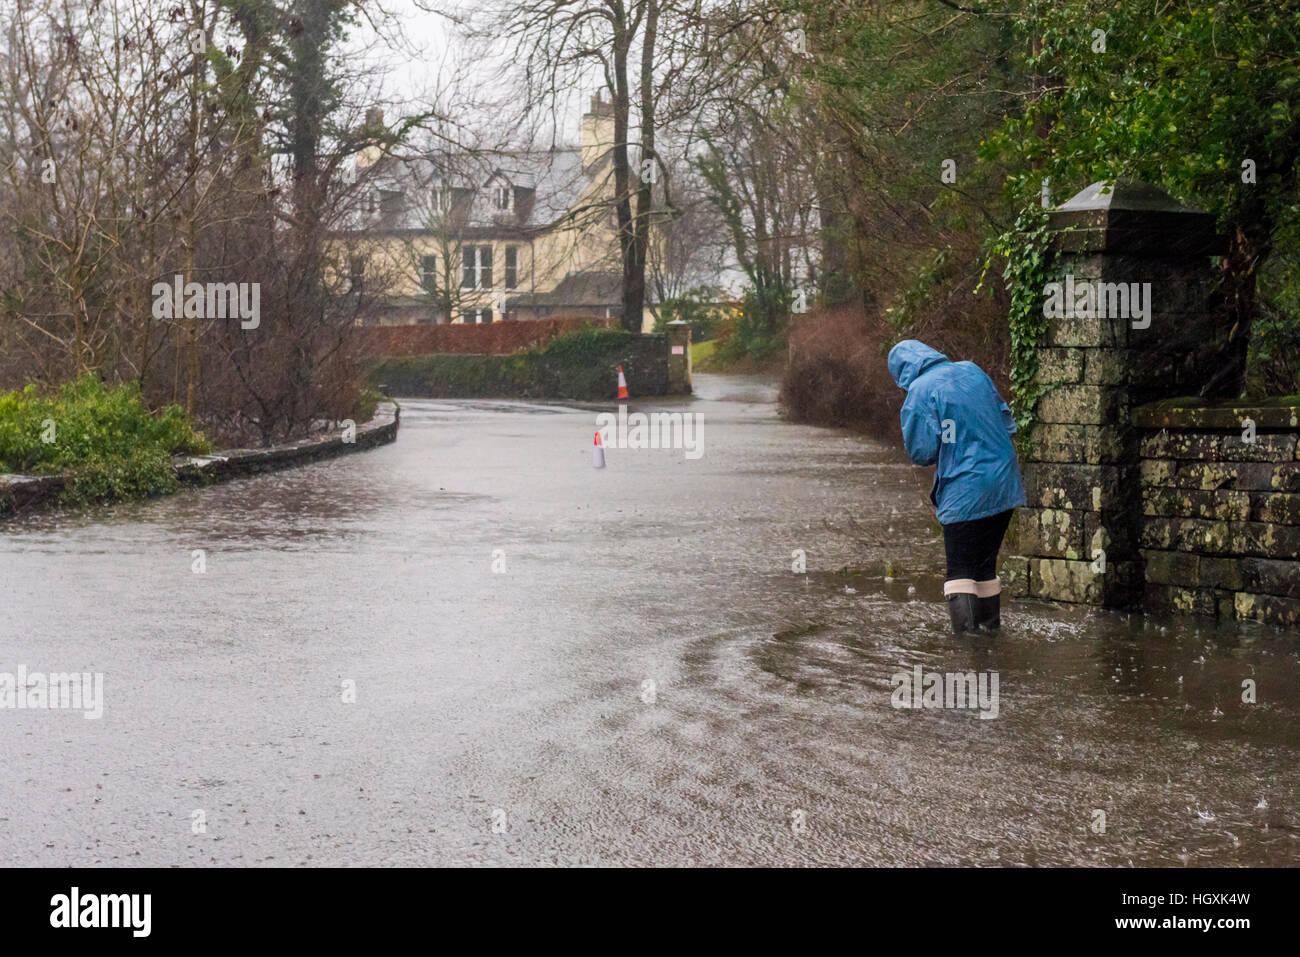 Flooding in Cumbria, North West England, UK weather Stock Photo